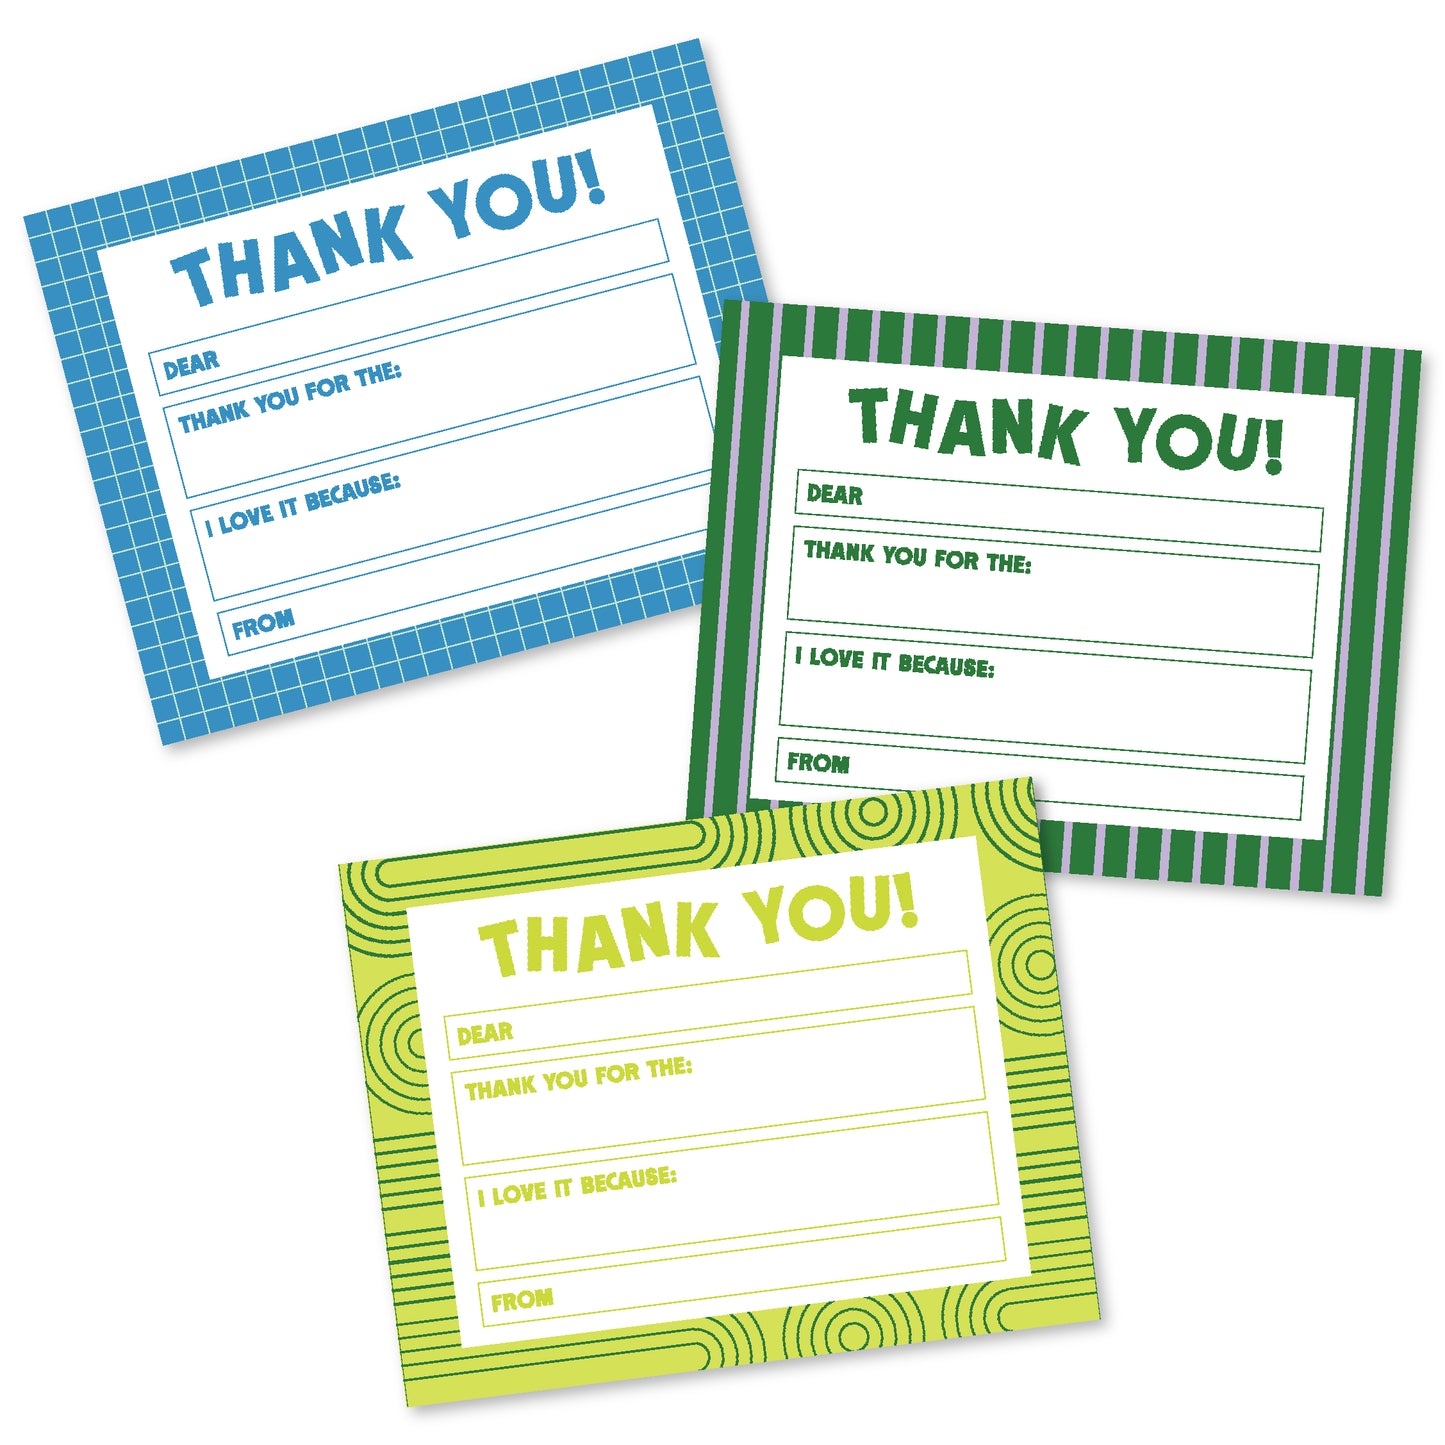 LINEWORK KIDDO CARDS: Set of 12 Fill-in-the-Blank Thank You Notes